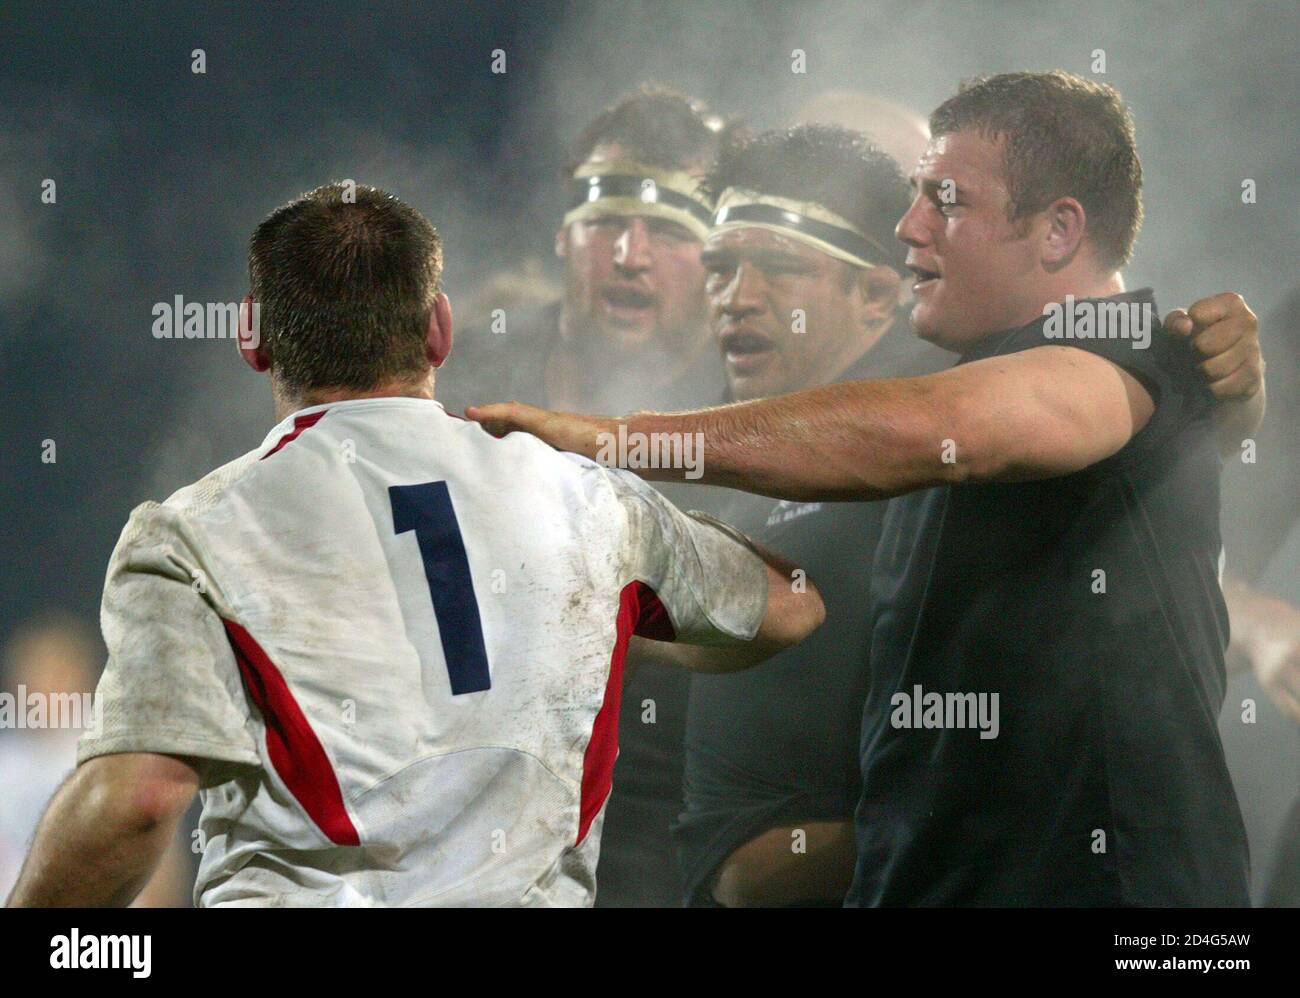 New Zealand All Blacks Tony Woodcock (R), Keven Mealamu and Carl Hayman (2nd left) push Englands Trevor Woodman (L) away after pushing Englands scrum off the ball during their rugby test in Dunedin June 12, 2004. New Zealand won the first of the two match rugby test series 36-3. REUTERS/Simon Baker  SB/CP Stock Photo